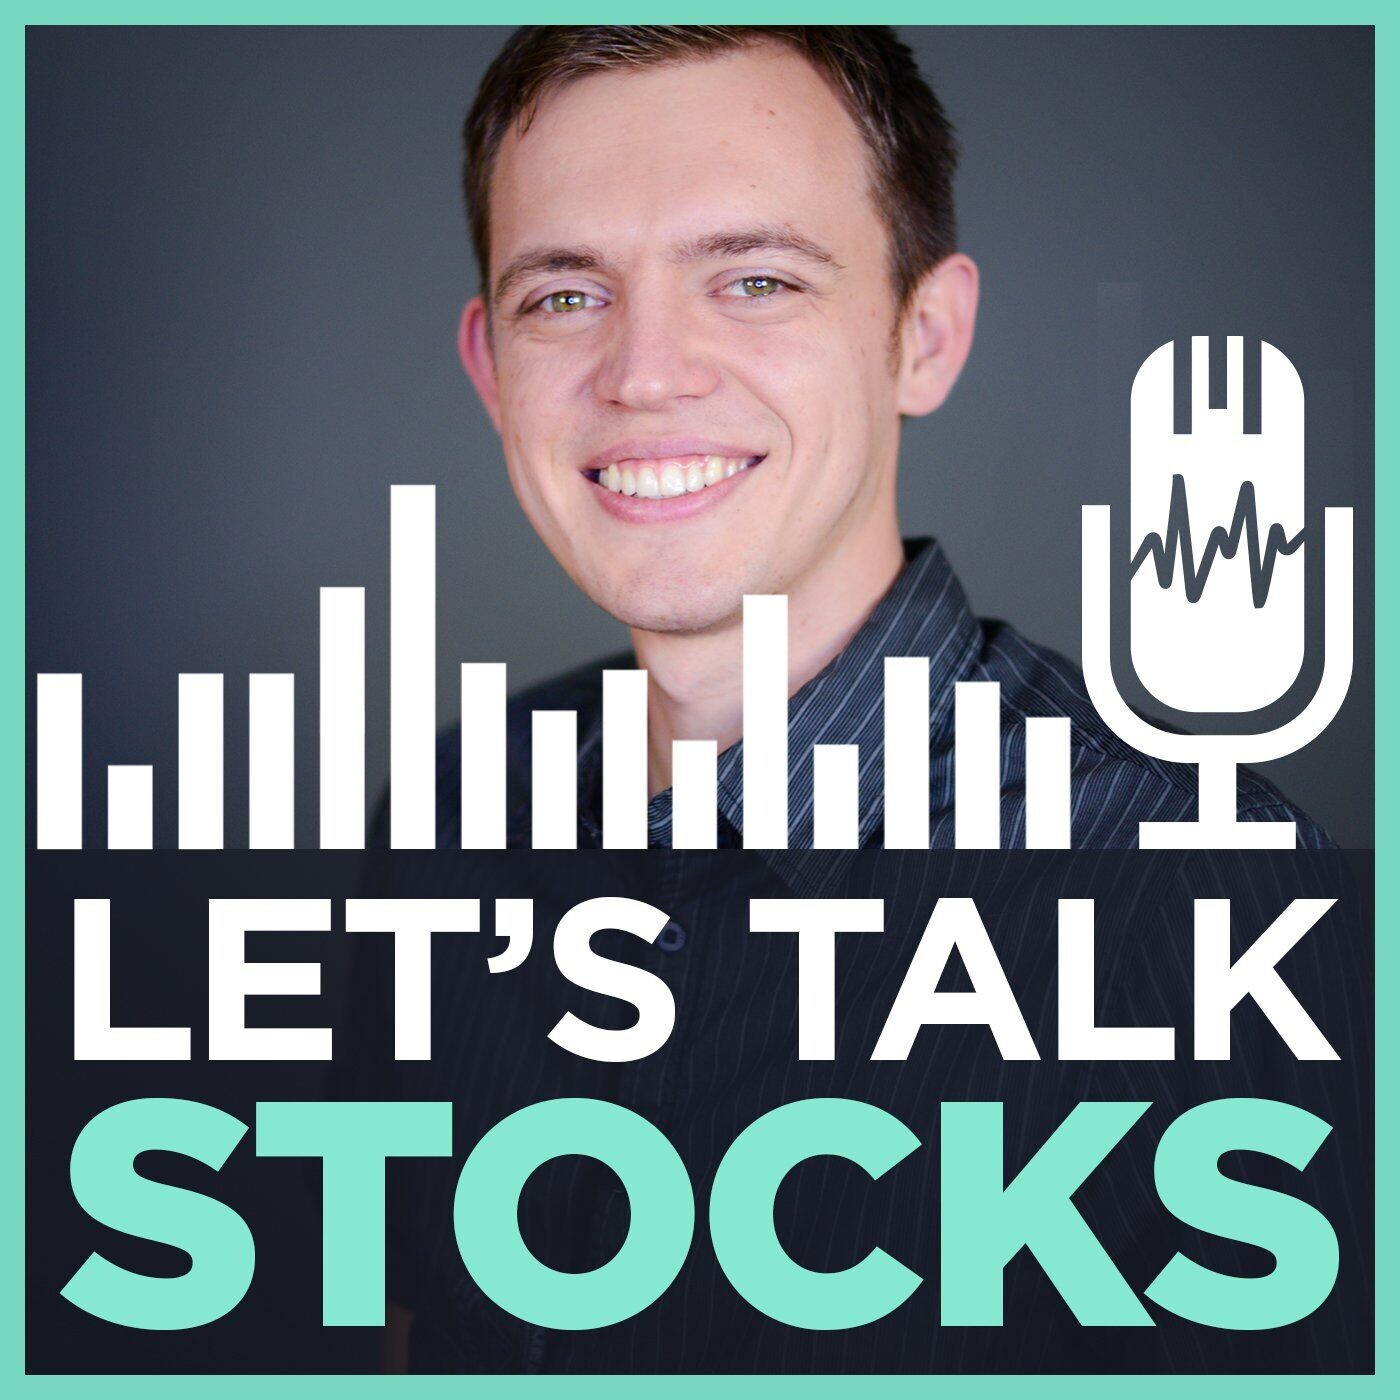 FAT Stock Traders are BAD Traders (Hungry Traders are Better) Ep 197